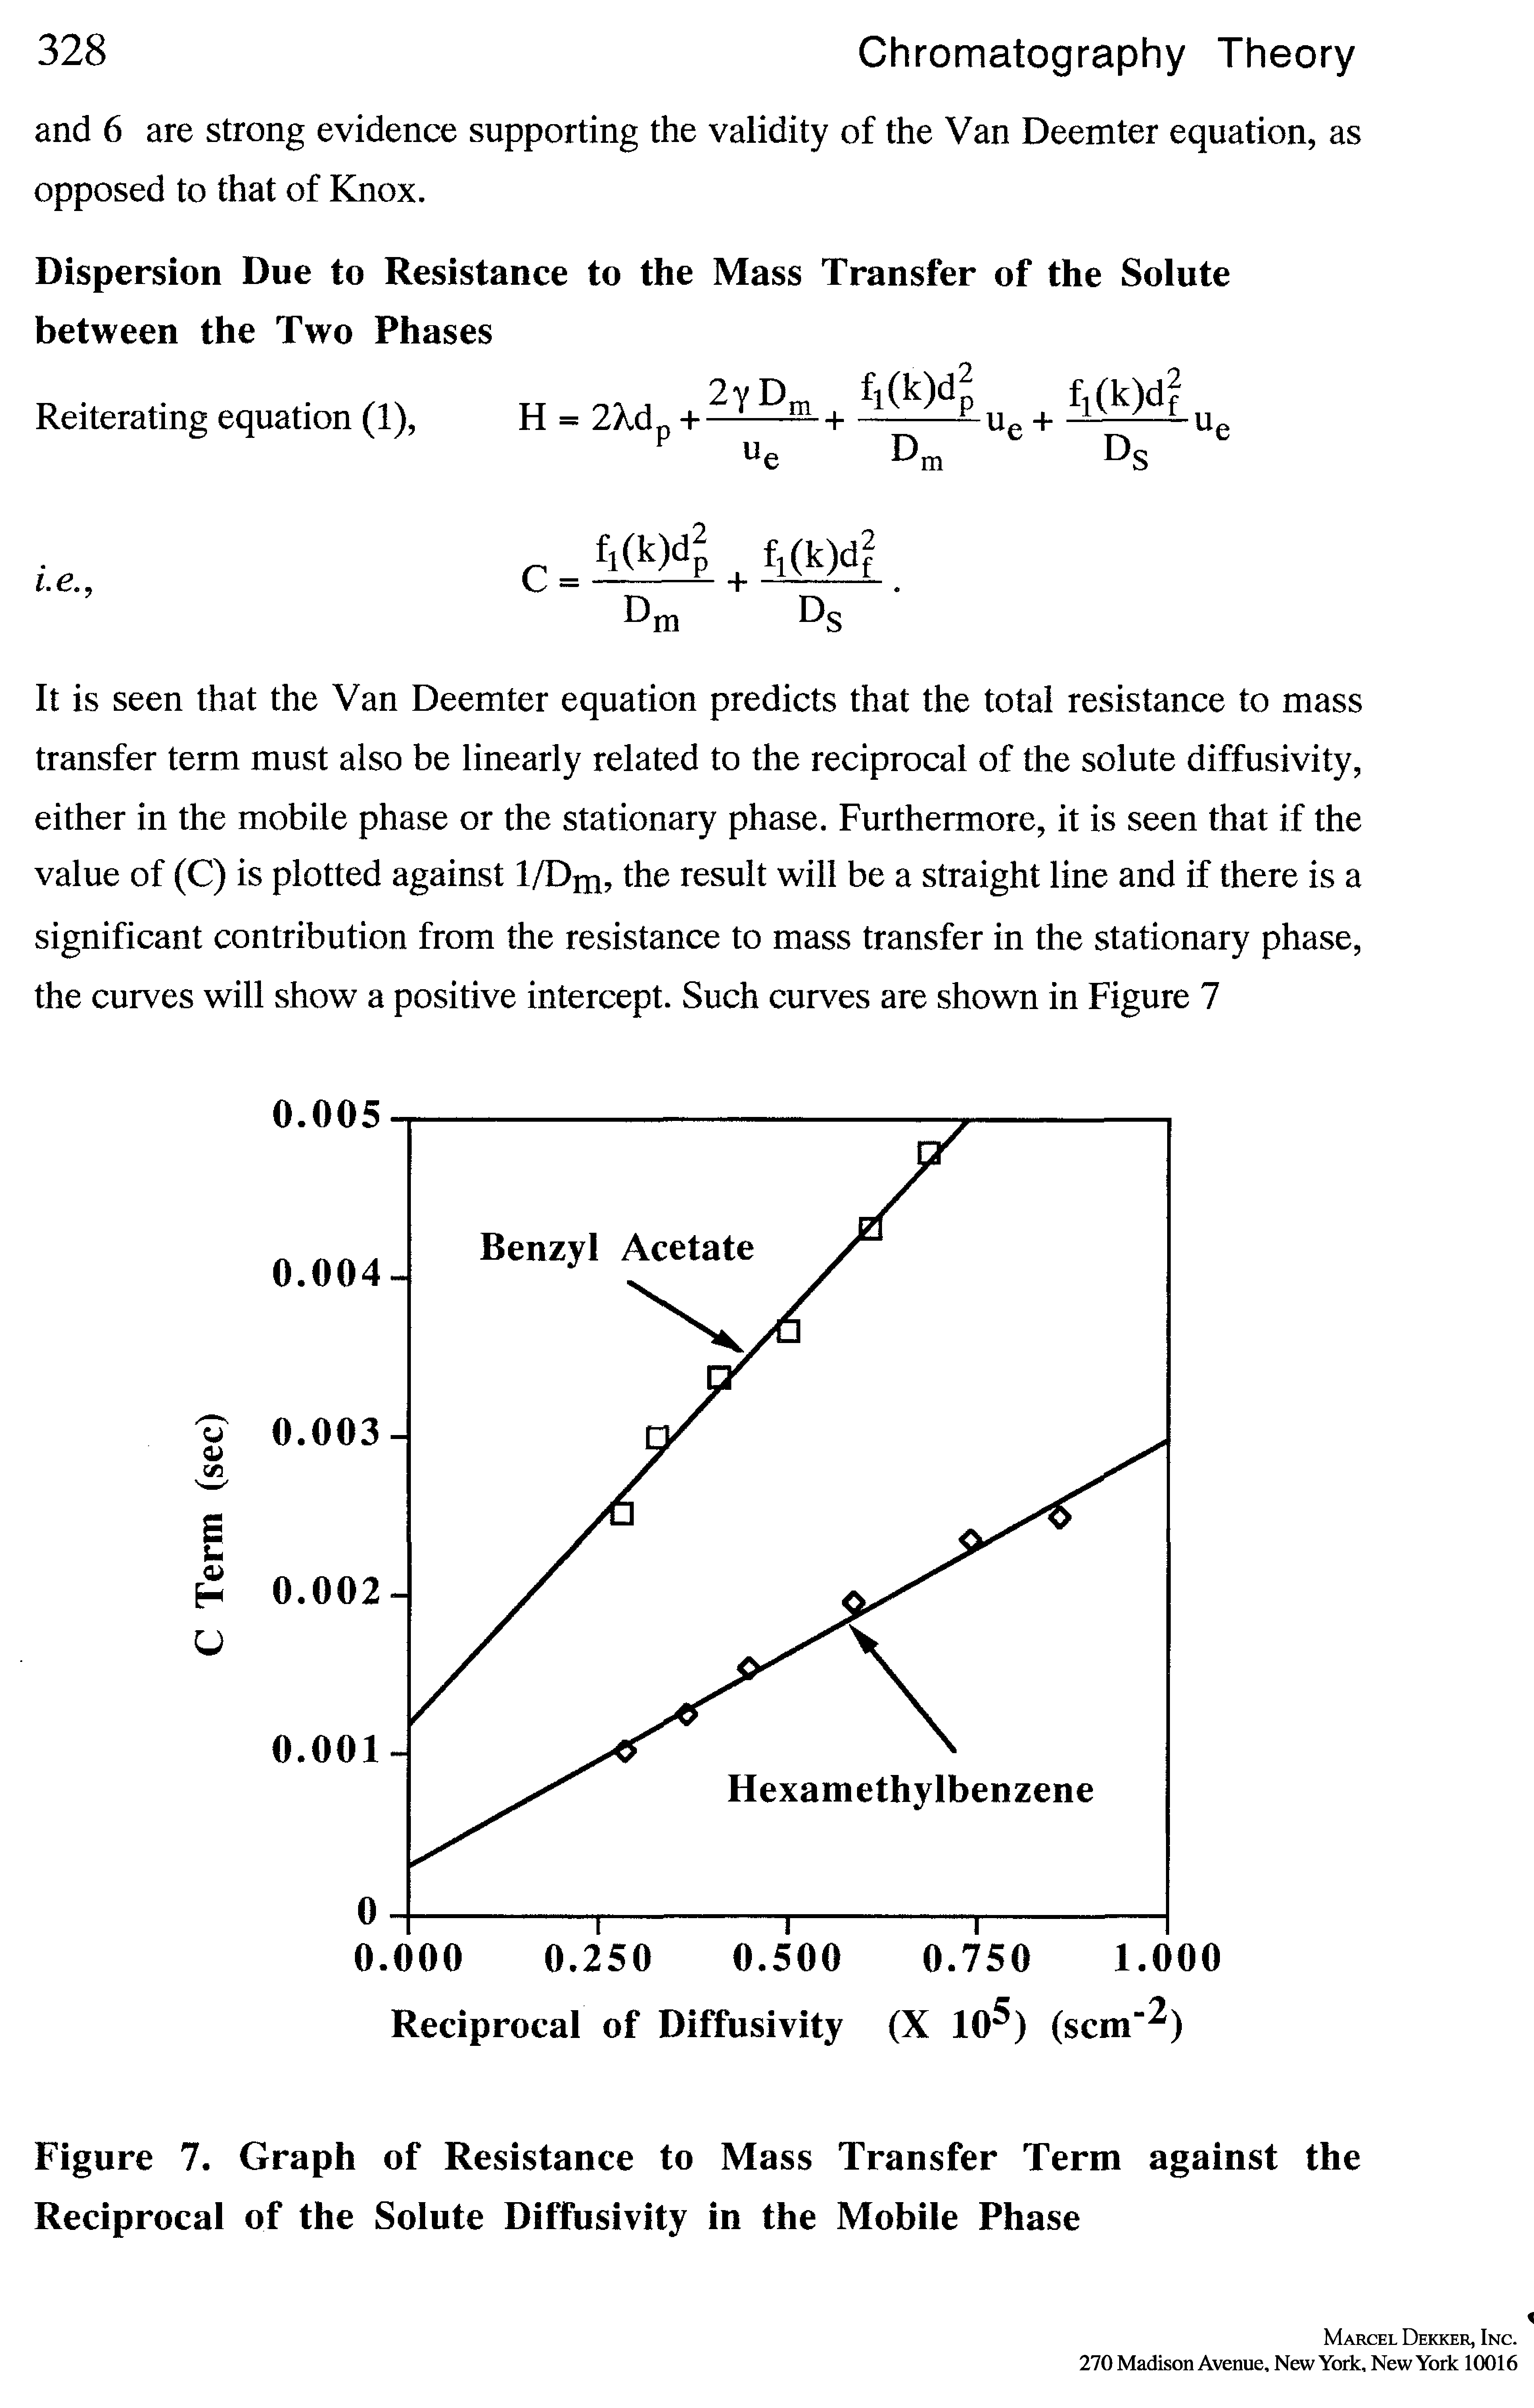 Figure 7. Graph of Resistance to Mass Transfer Term against the Reciprocal of the Solute Diffusivity in the Mobile Phase...